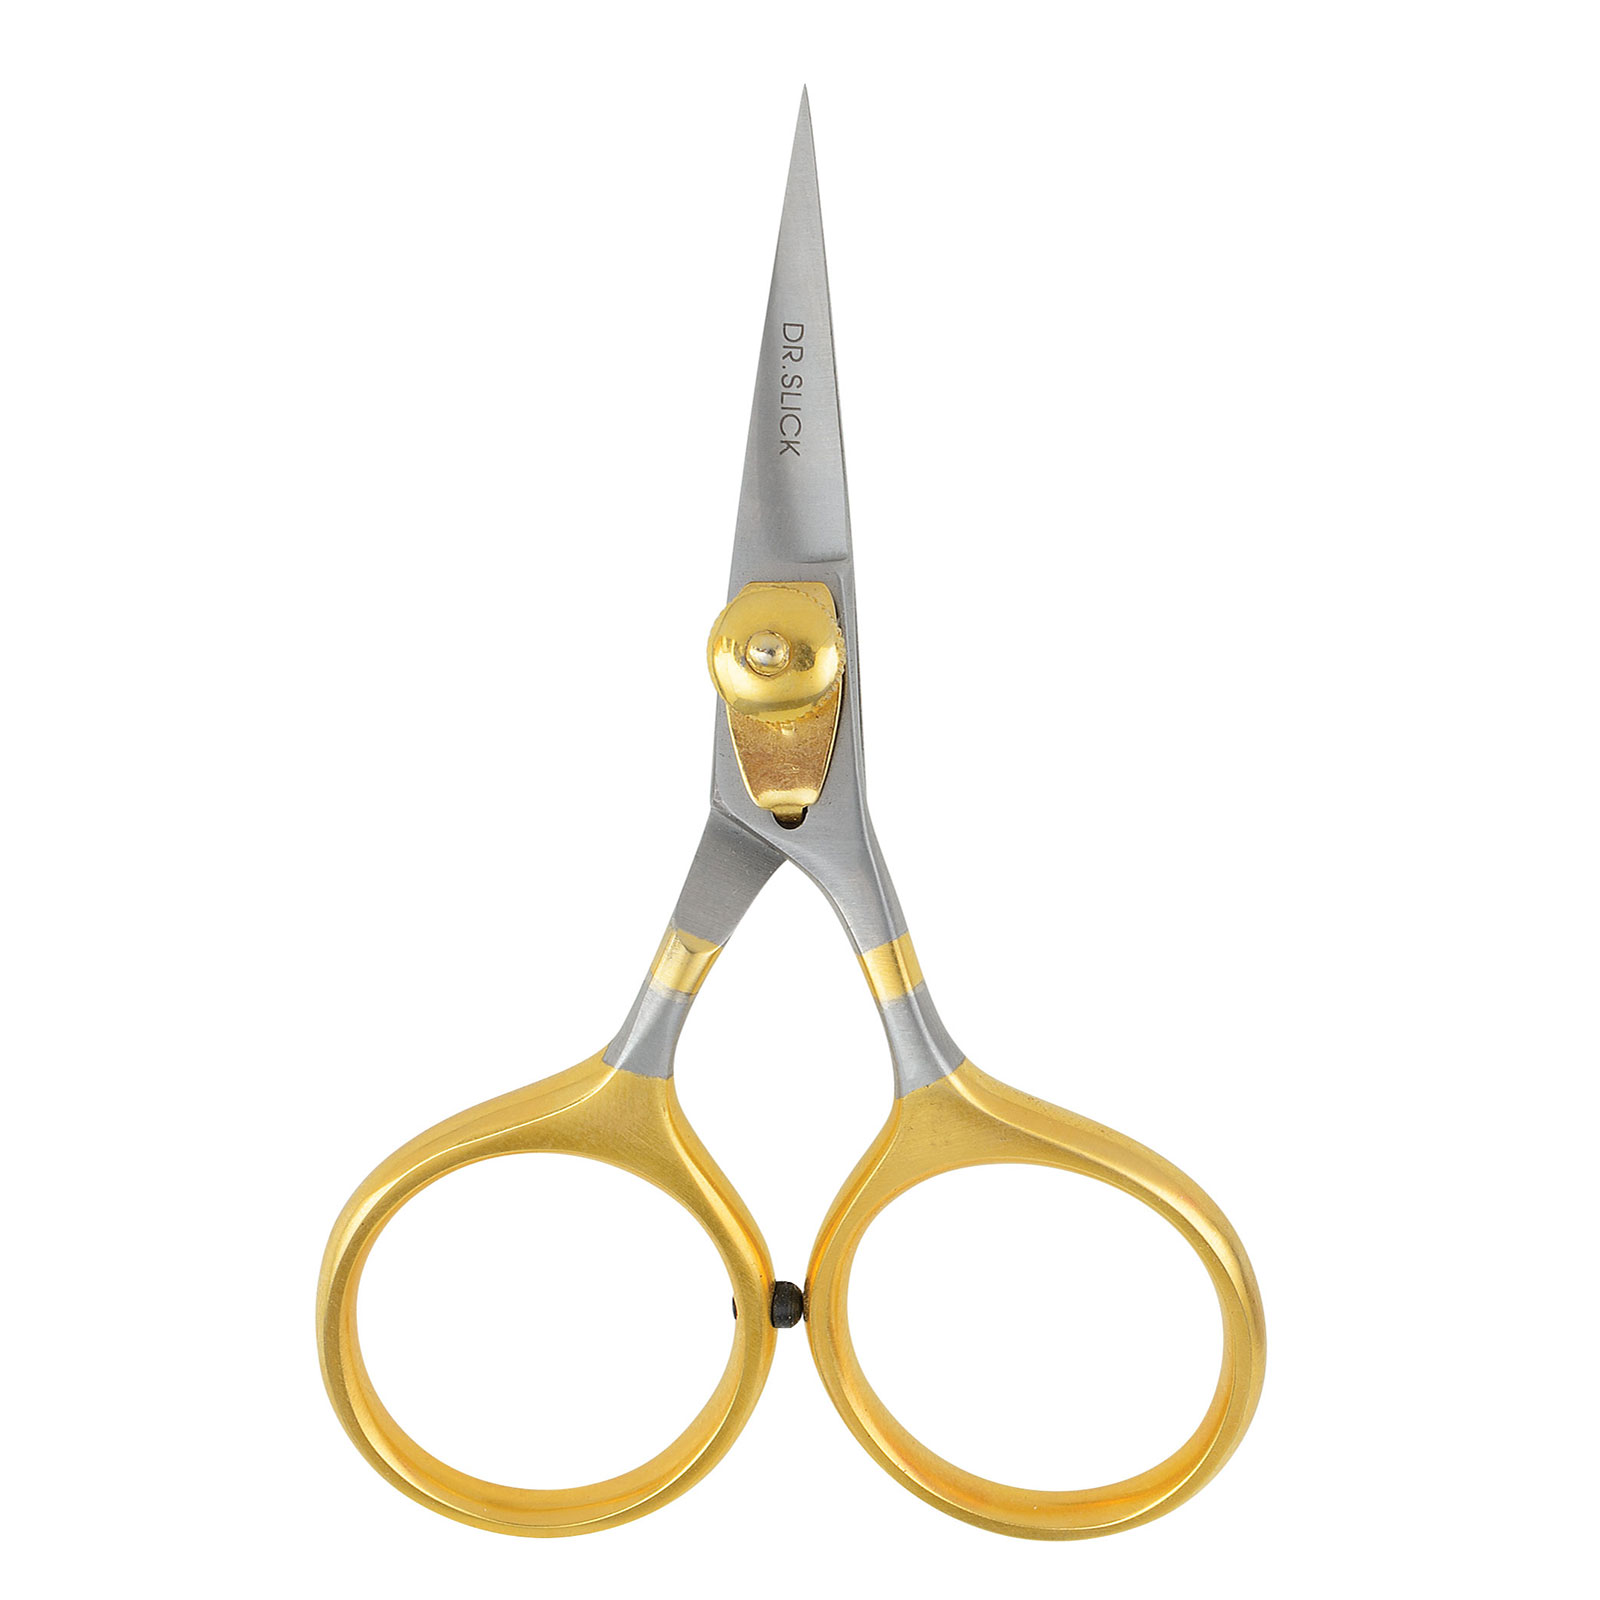 Tungsten Carbide Fly Tying Scissors Straight /& Curved Blade 3.5/" And 4/"